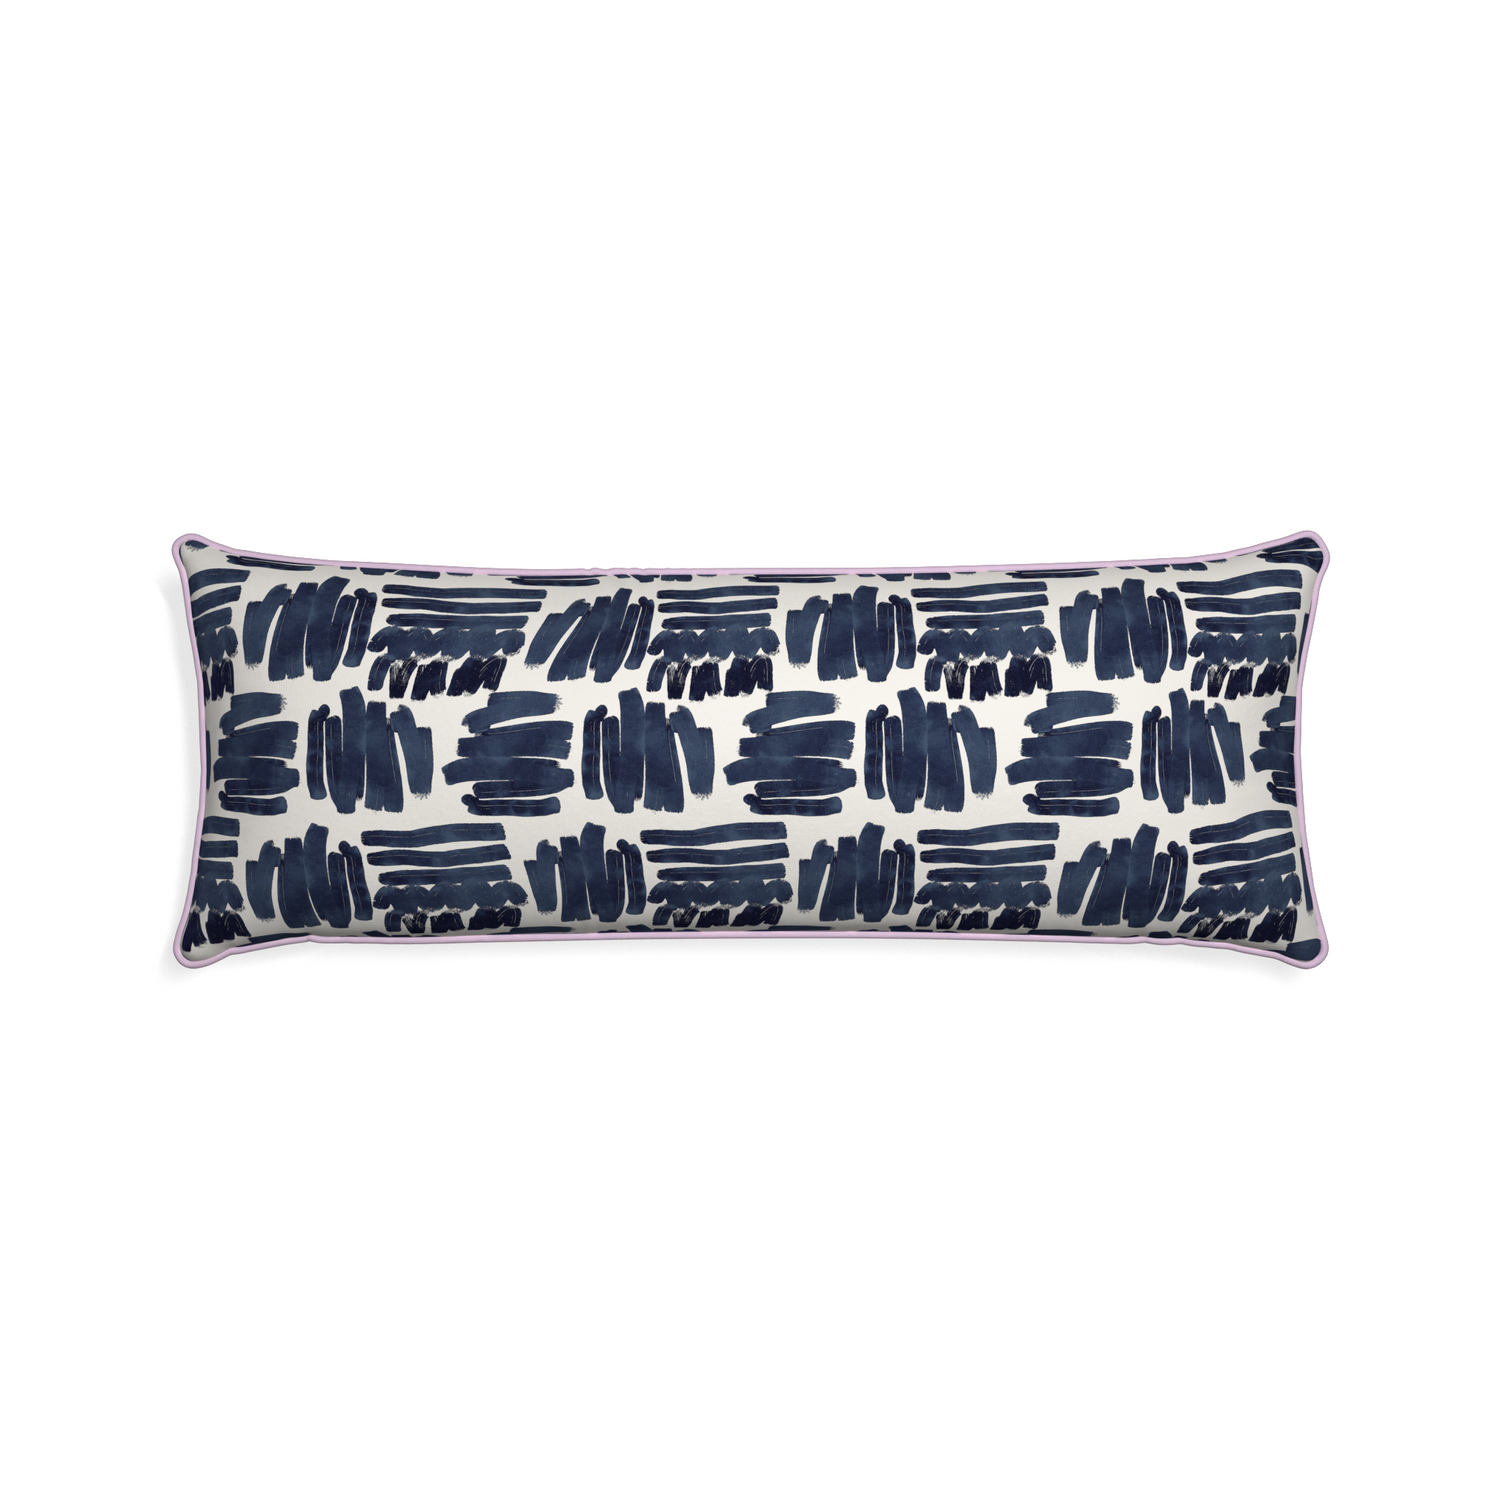 Xl-lumbar warby custom pillow with l piping on white background